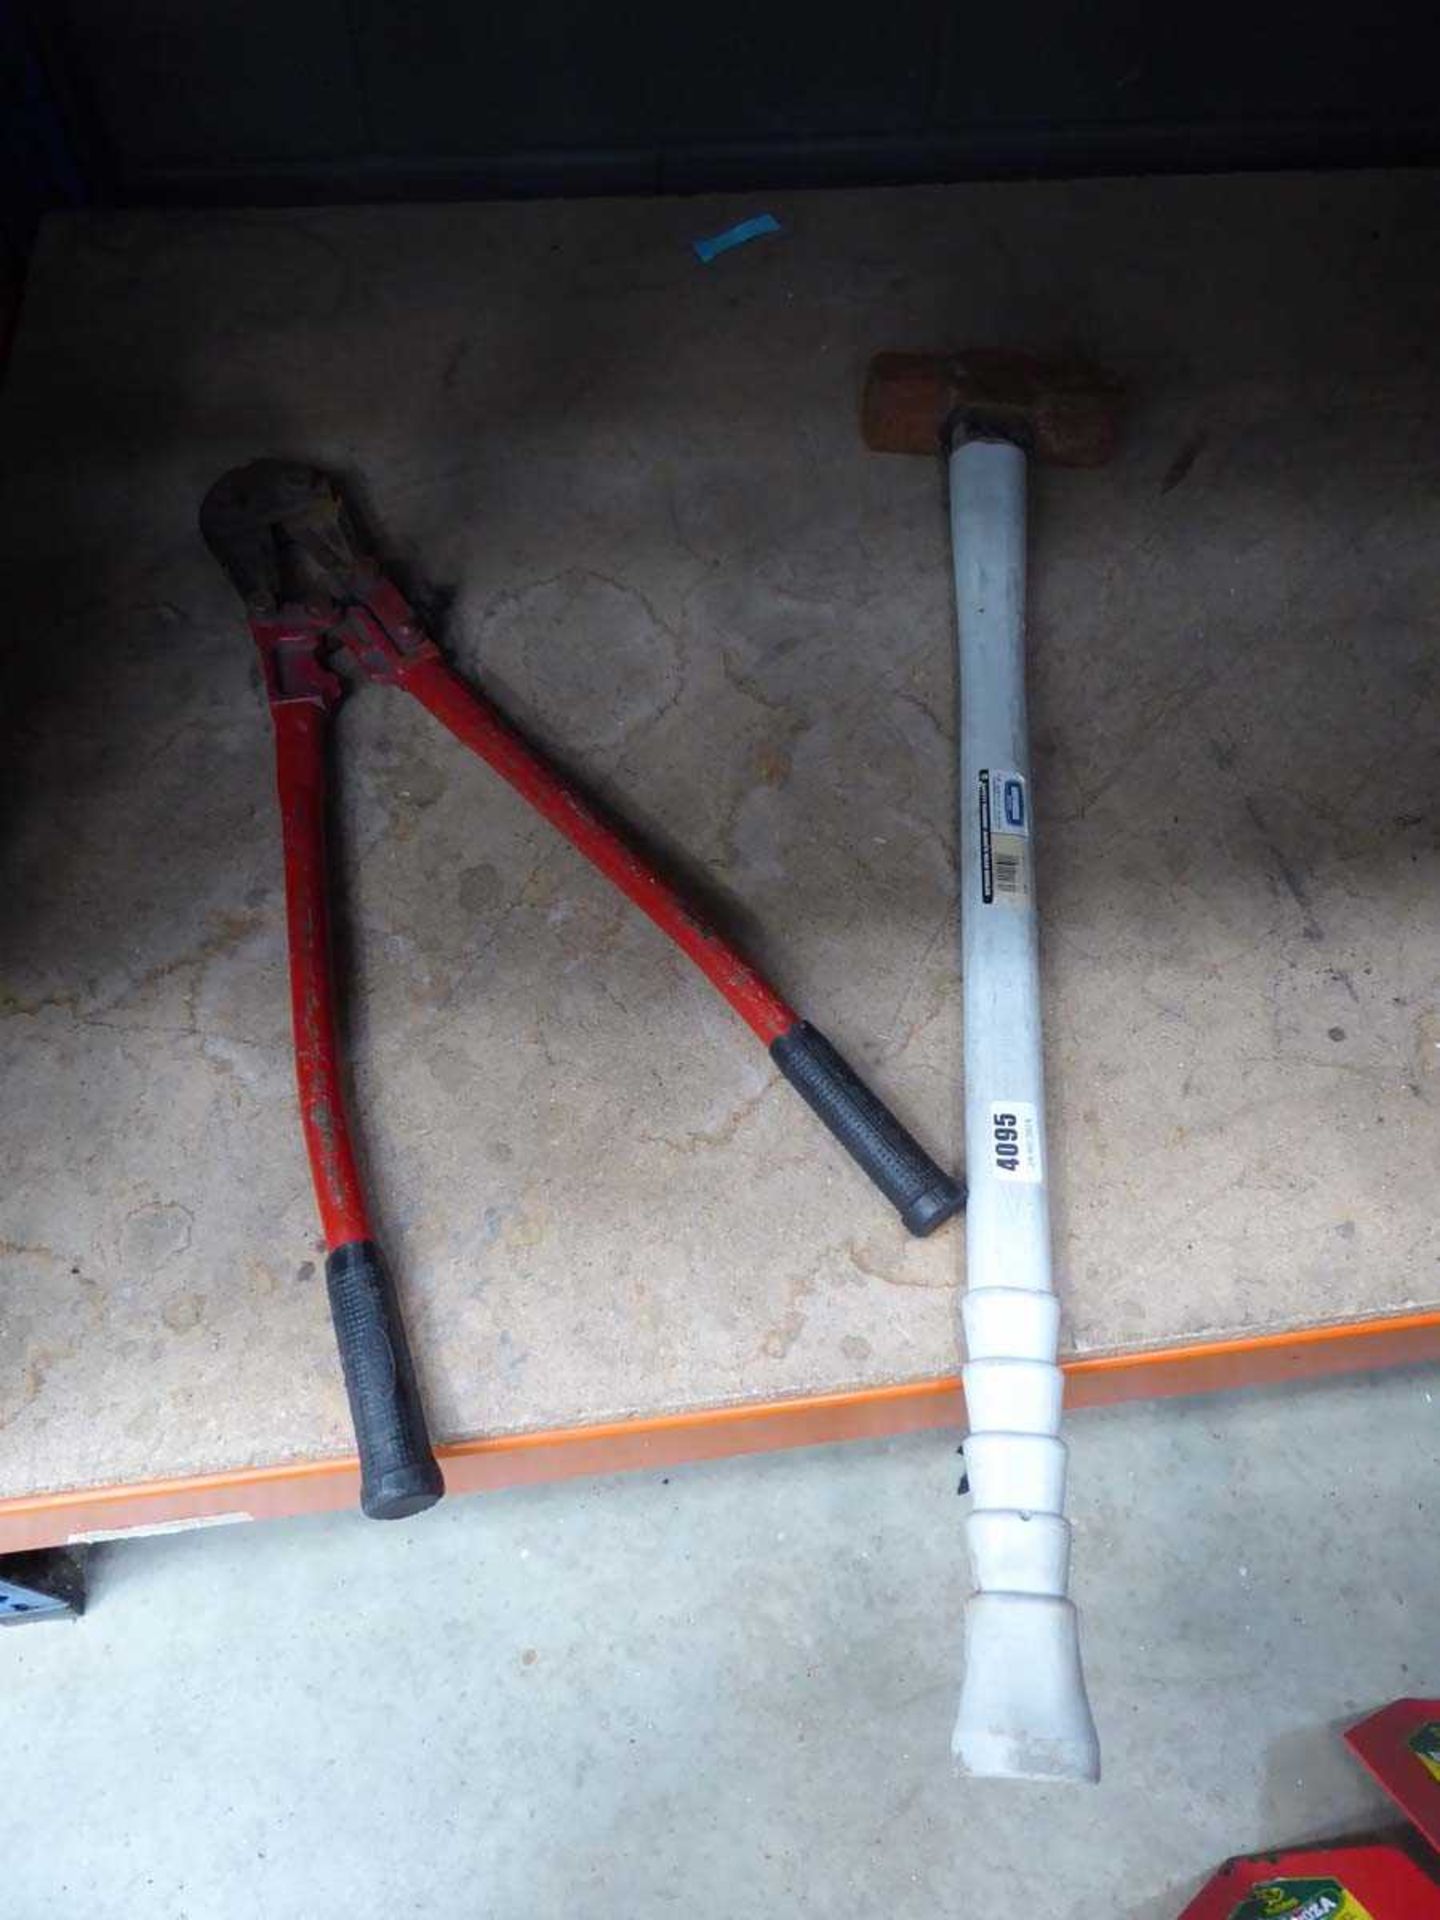 Sledge hammer and pair of bolt croppers